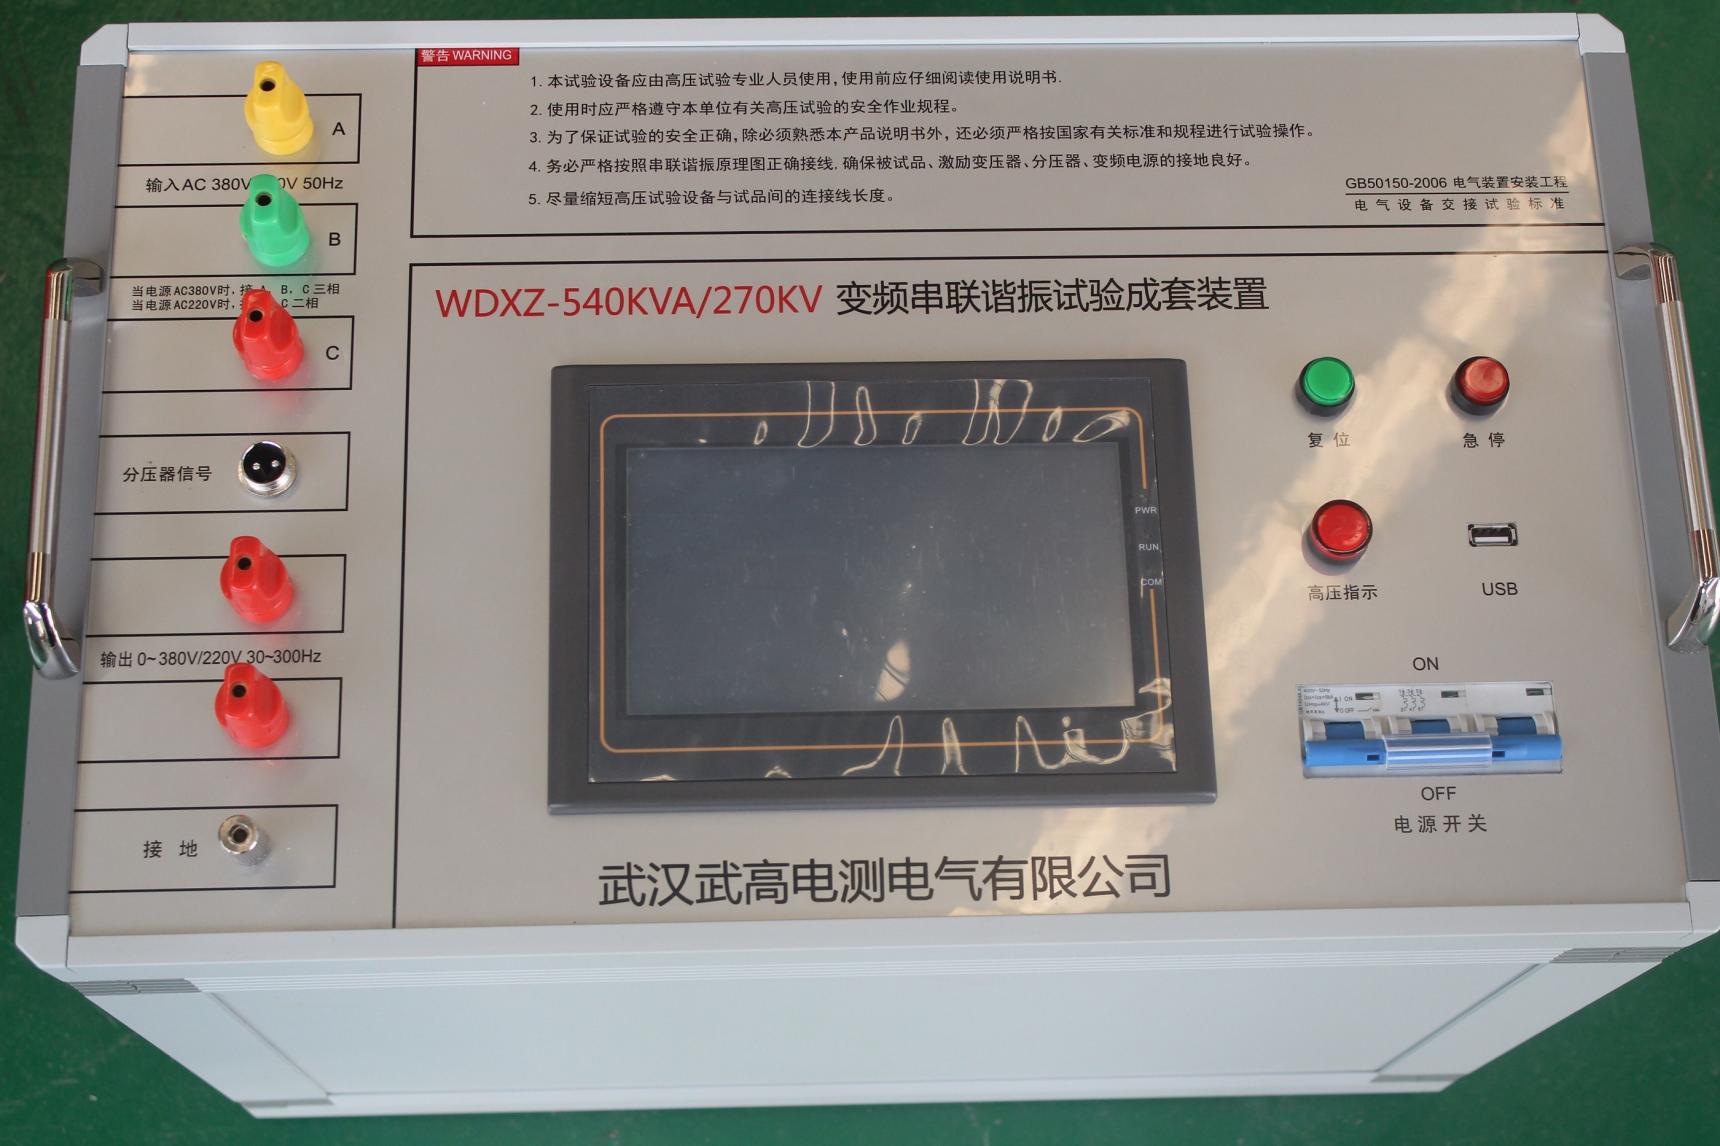 WDXZ-540KVA470KV frequency conversion series resonance withstand voltage test device Frequency conversion series resonance test